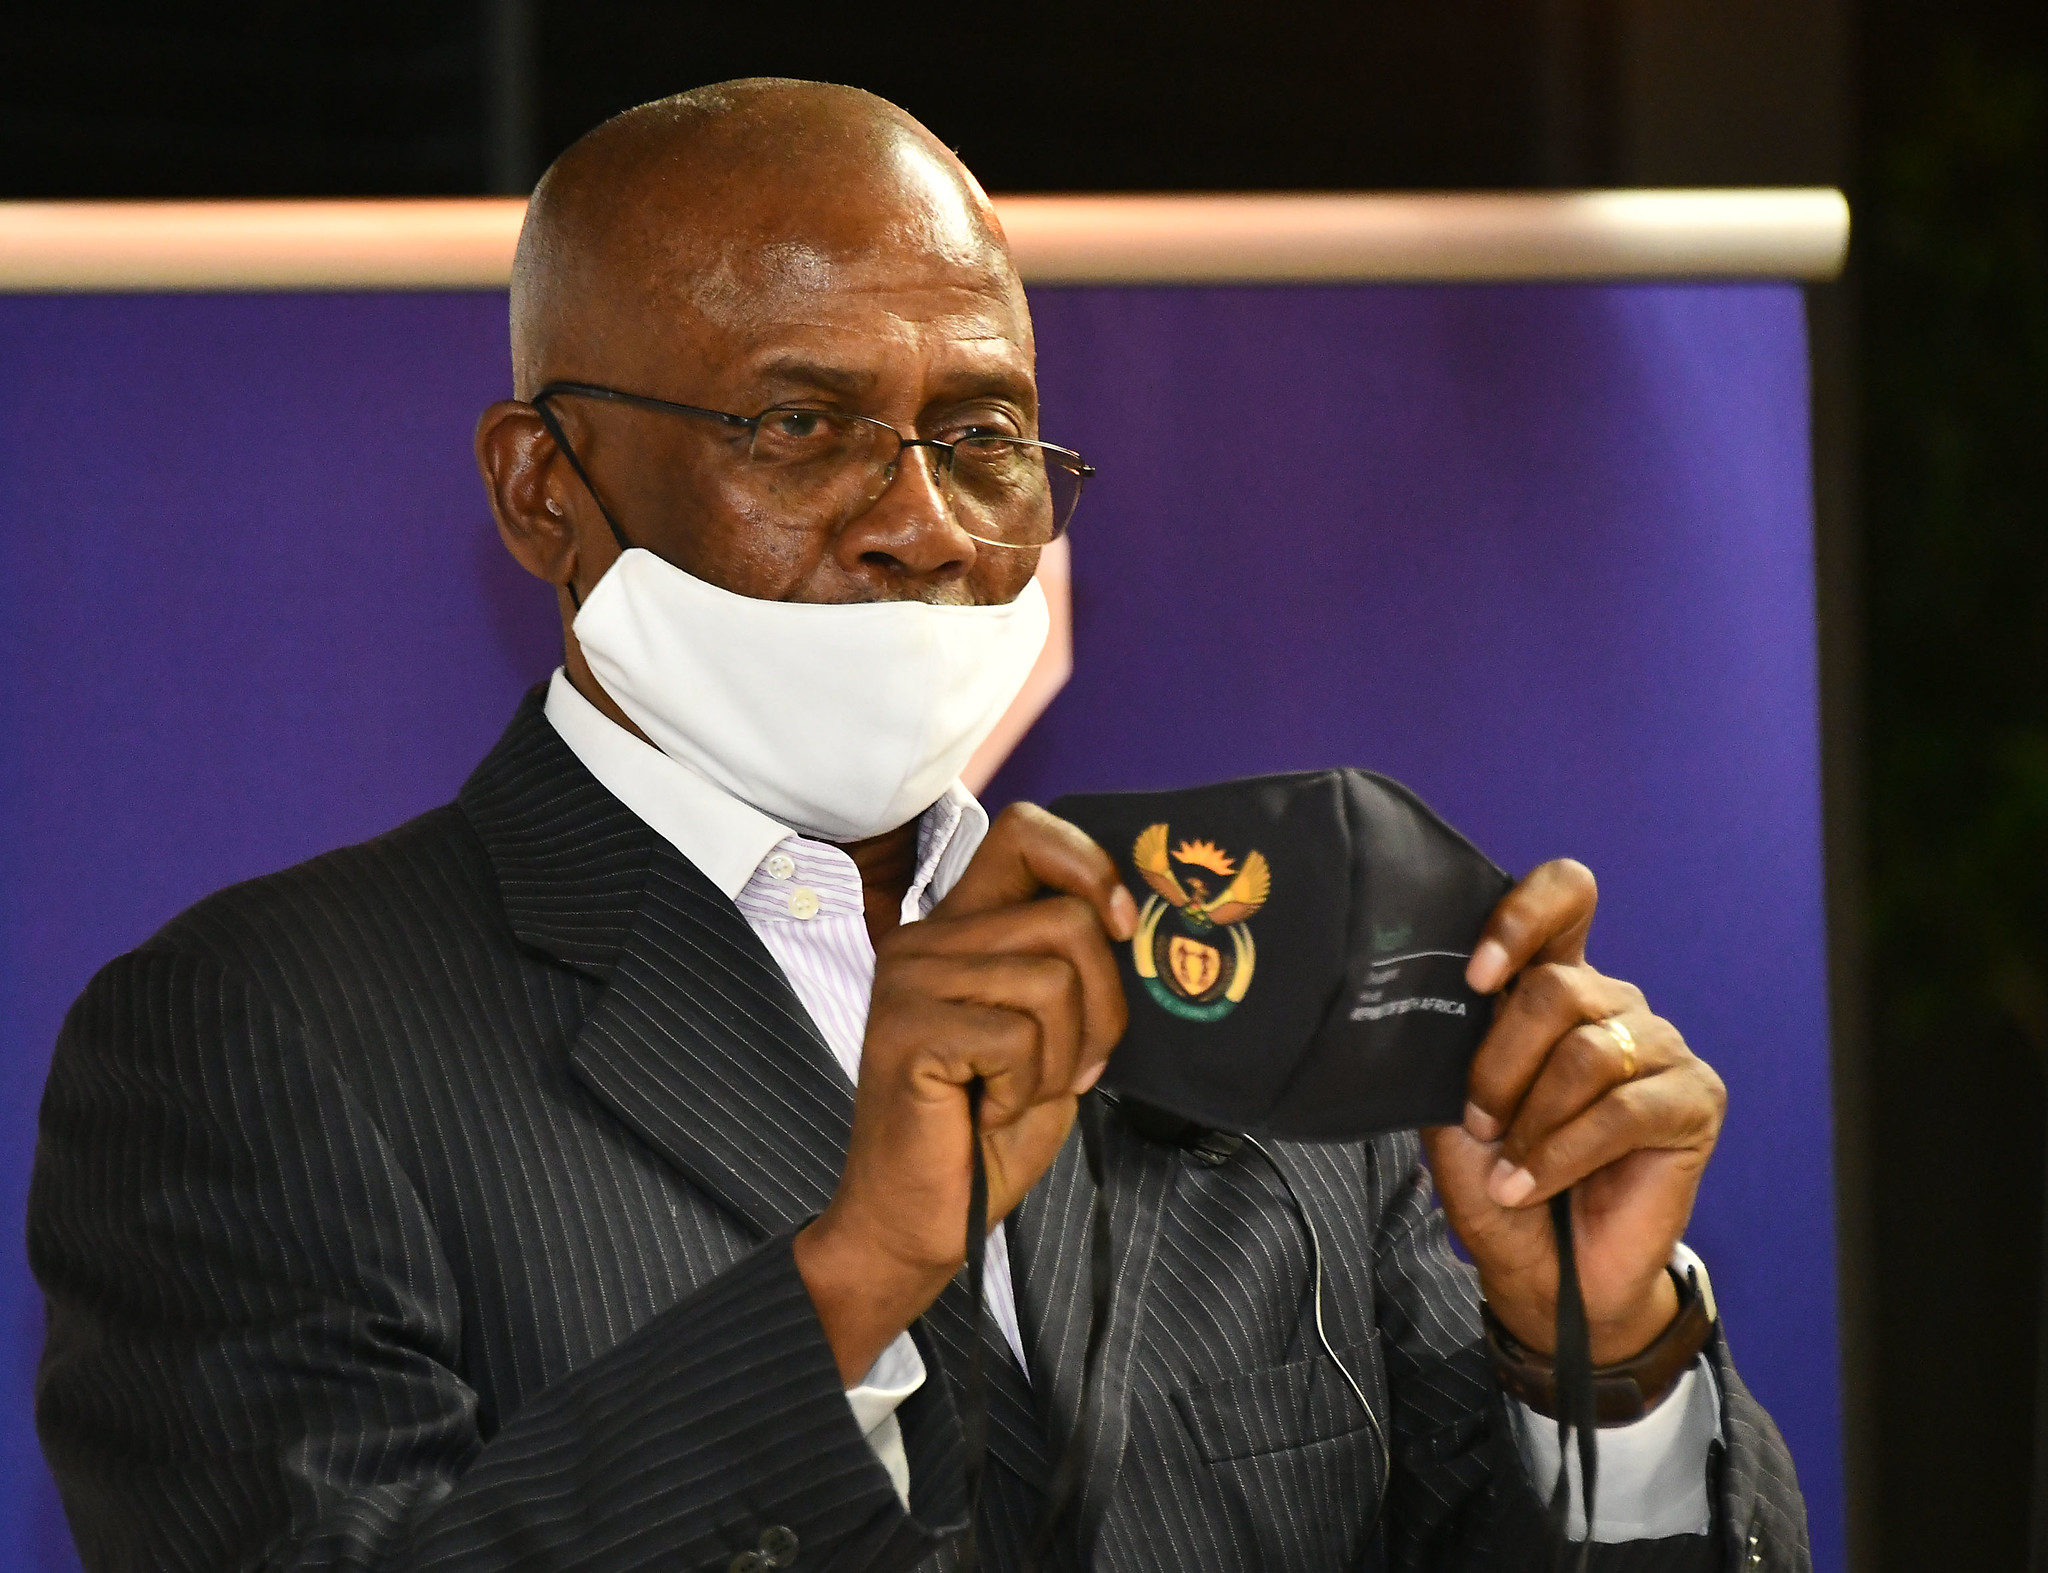 Ithuba boss Seth Phalatse with a Covid-19 mask that is now part of an alleged money laundering scheme involving Zweli Mkhize and Digital Vibes.